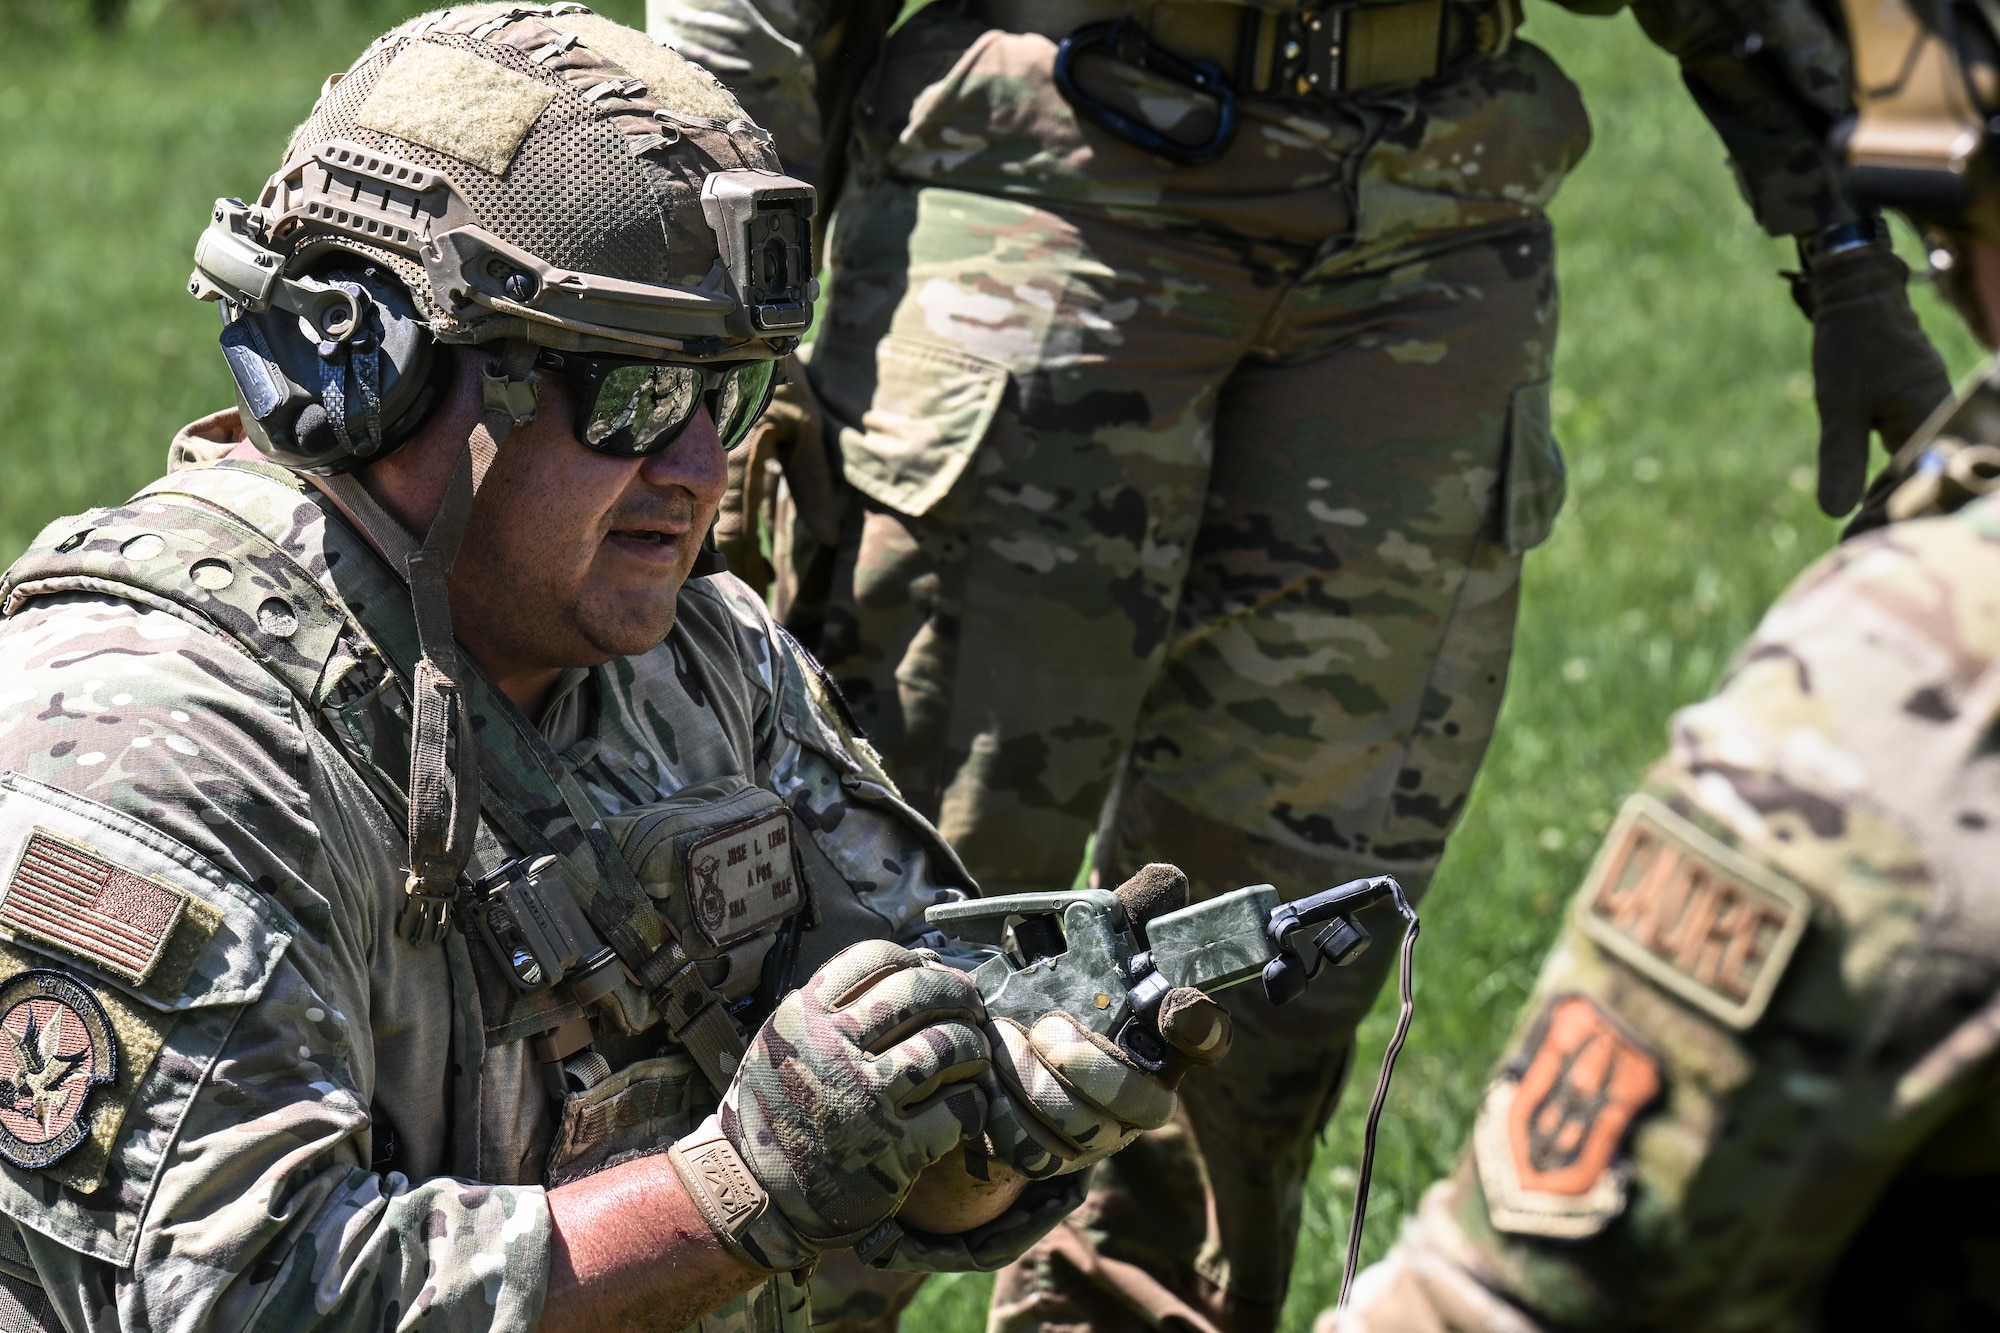 Senior Airman Jose Leos, a Defender assigned to the Texas Air National Guard’s 204th Security Forces Squadron, performs a safety check prior to detonating a claymore during an Integrated Defense Leadership Course exercise on Aug. 15, 2023, at Camp James A. Garfield Joint Military Training Center, Ohio.